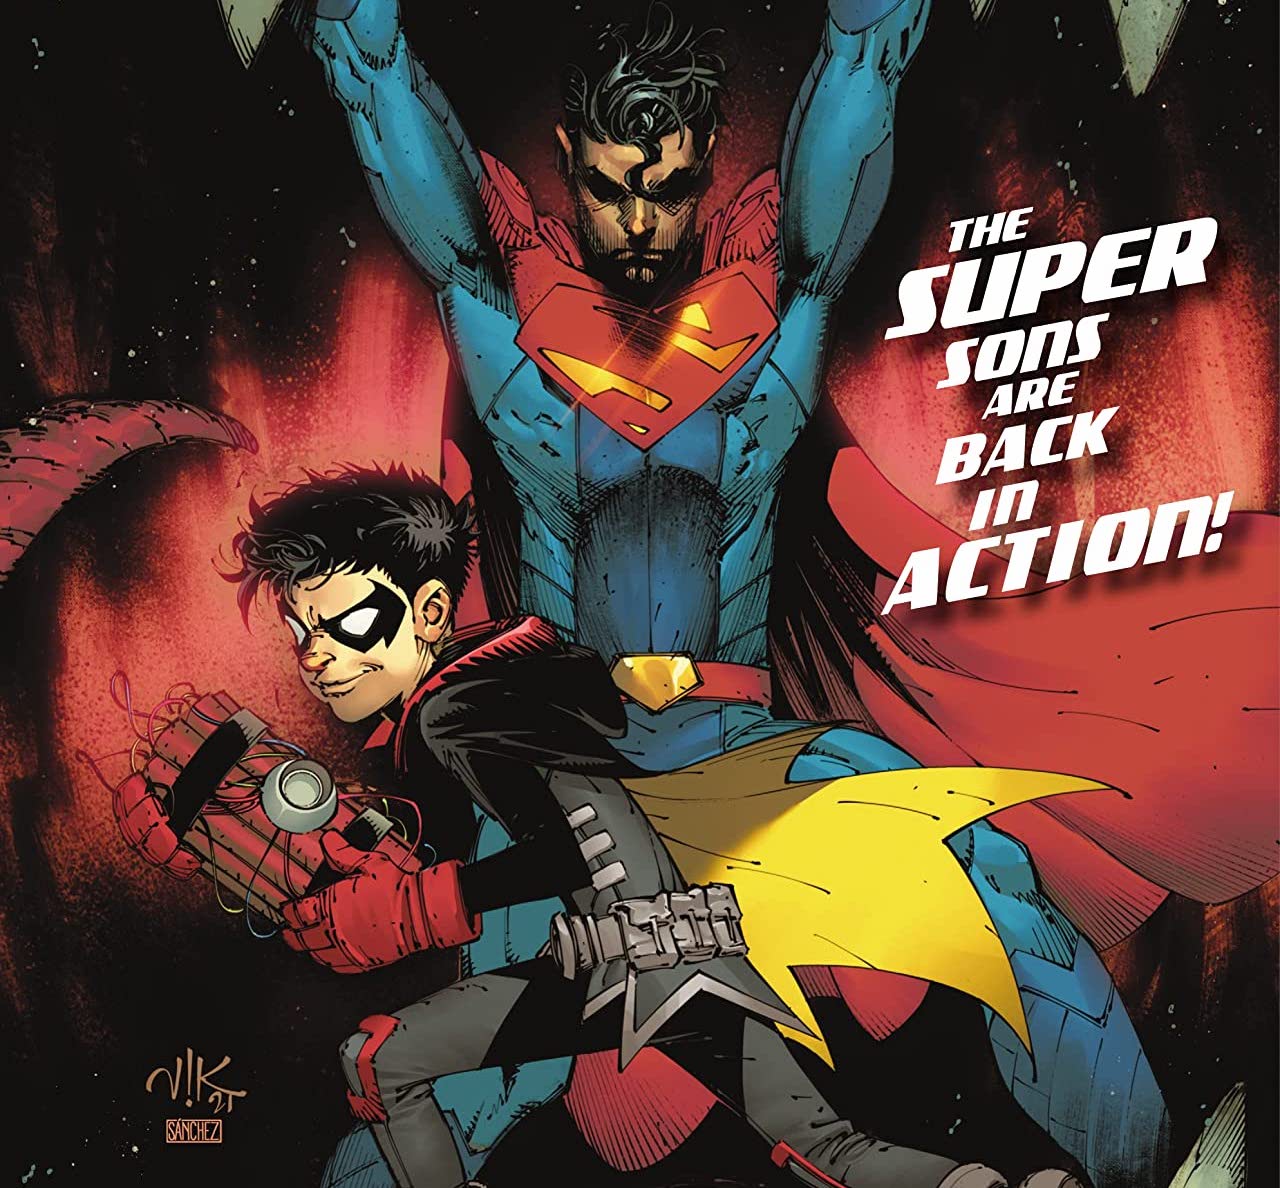 'Superman & Robin Special' #1 wraps up a loose end